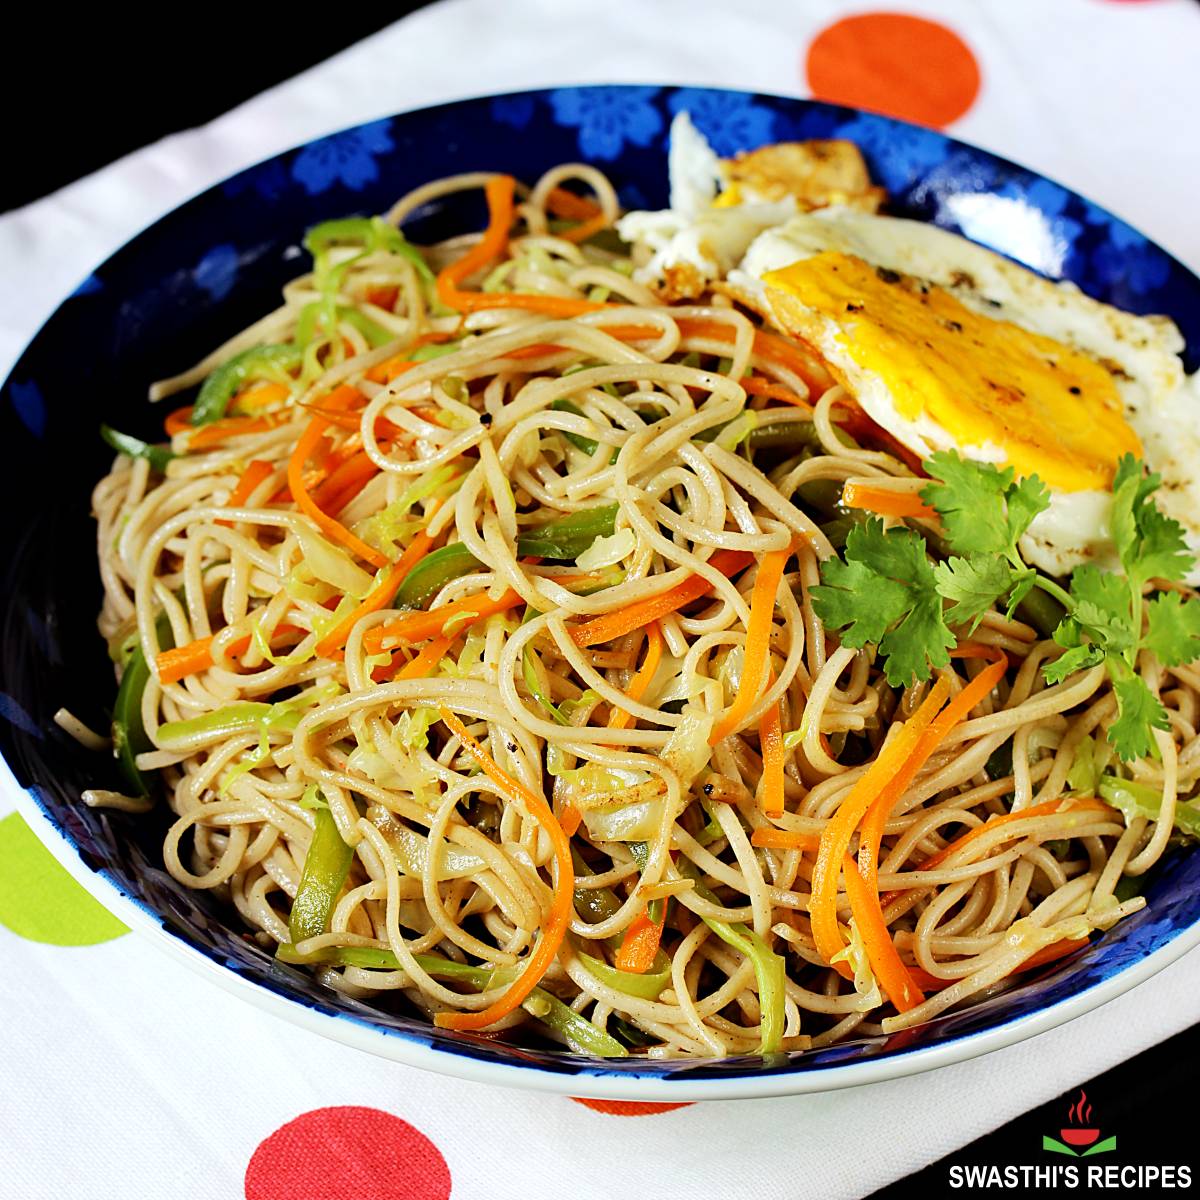 Veg noodles recipe made with vegetables, noodles and sauce